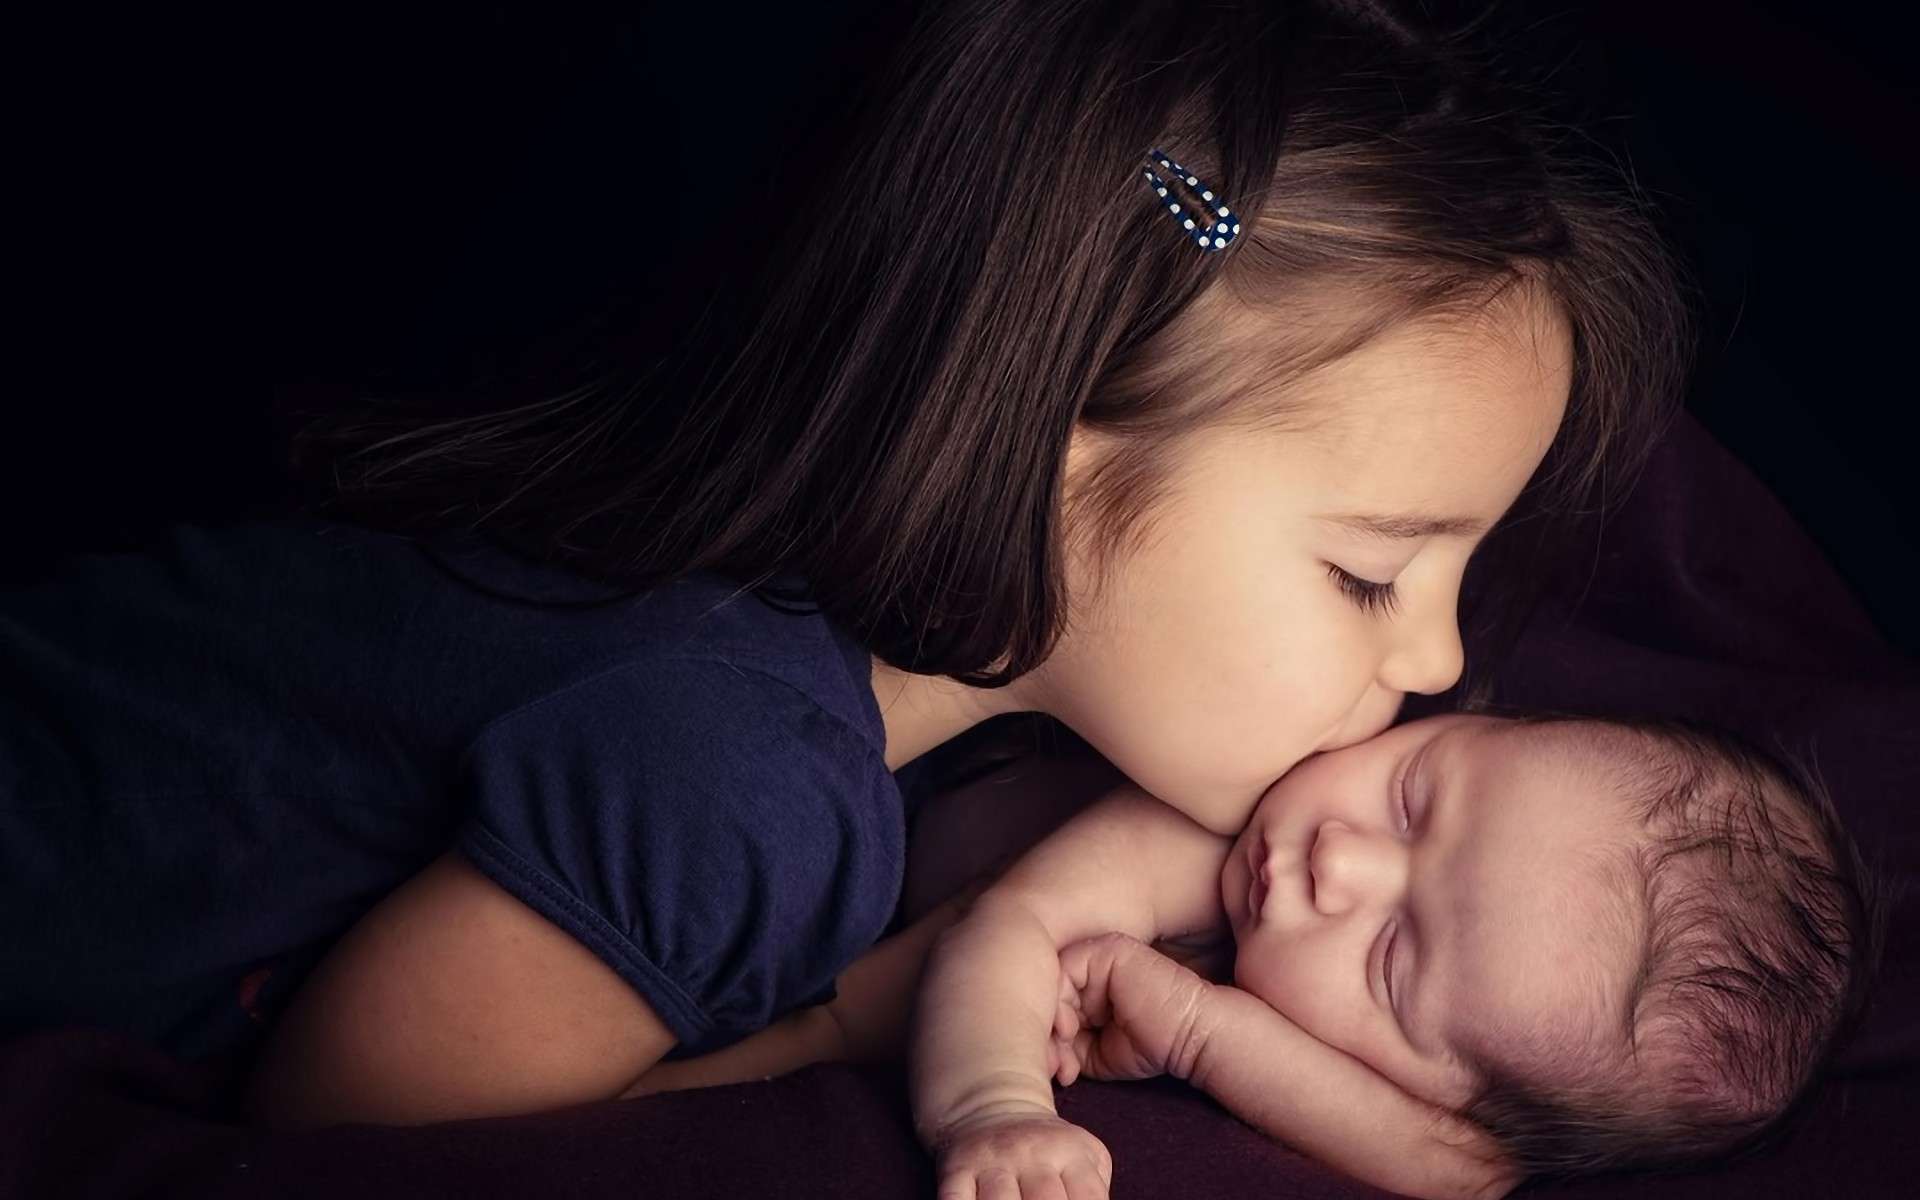 A Cute Babies Baby Girls Kissing Wallpapers Download - Cute Brother And Sister Images Hd , HD Wallpaper & Backgrounds